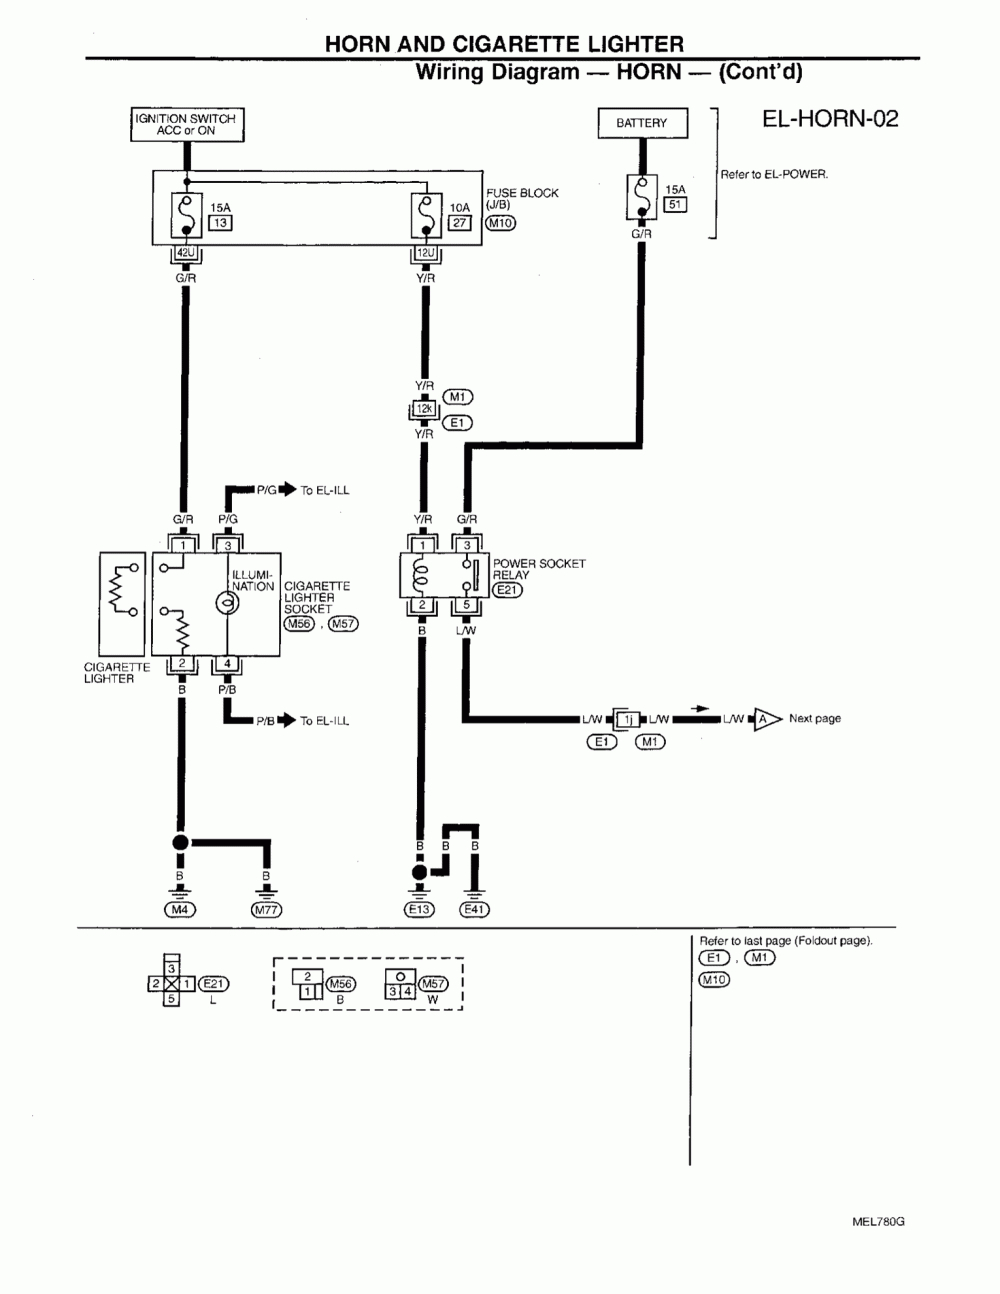 Repair Guides | Electrical System (1997) | Horn And Cigarette - Horn Wiring Diagram